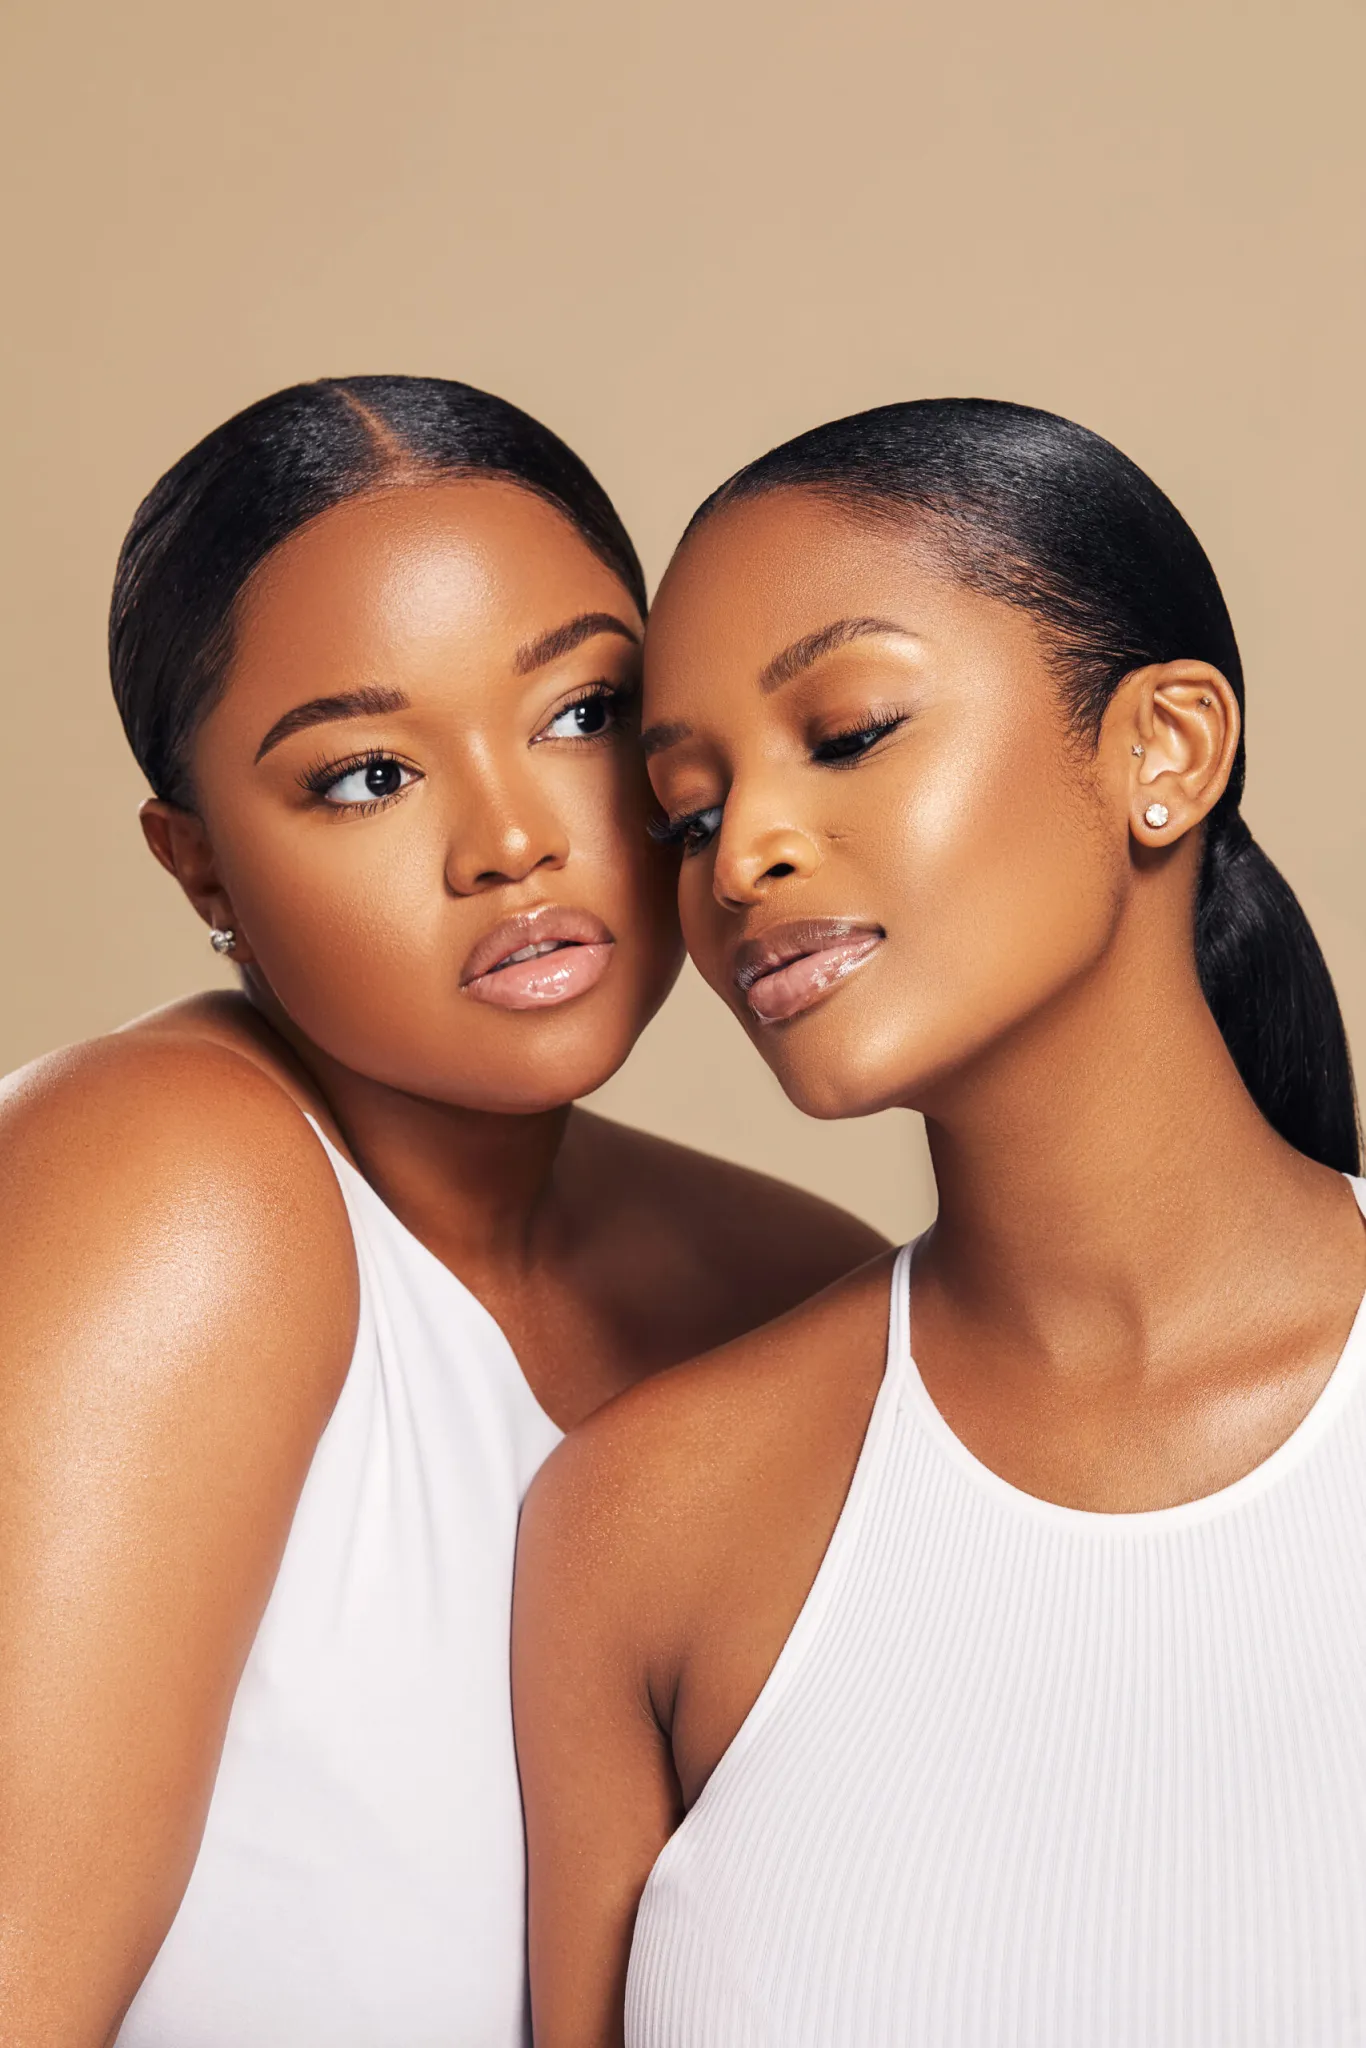 Glamour magazine's cover features Ayanda and Lungile Thabethe, who both look very stunning.